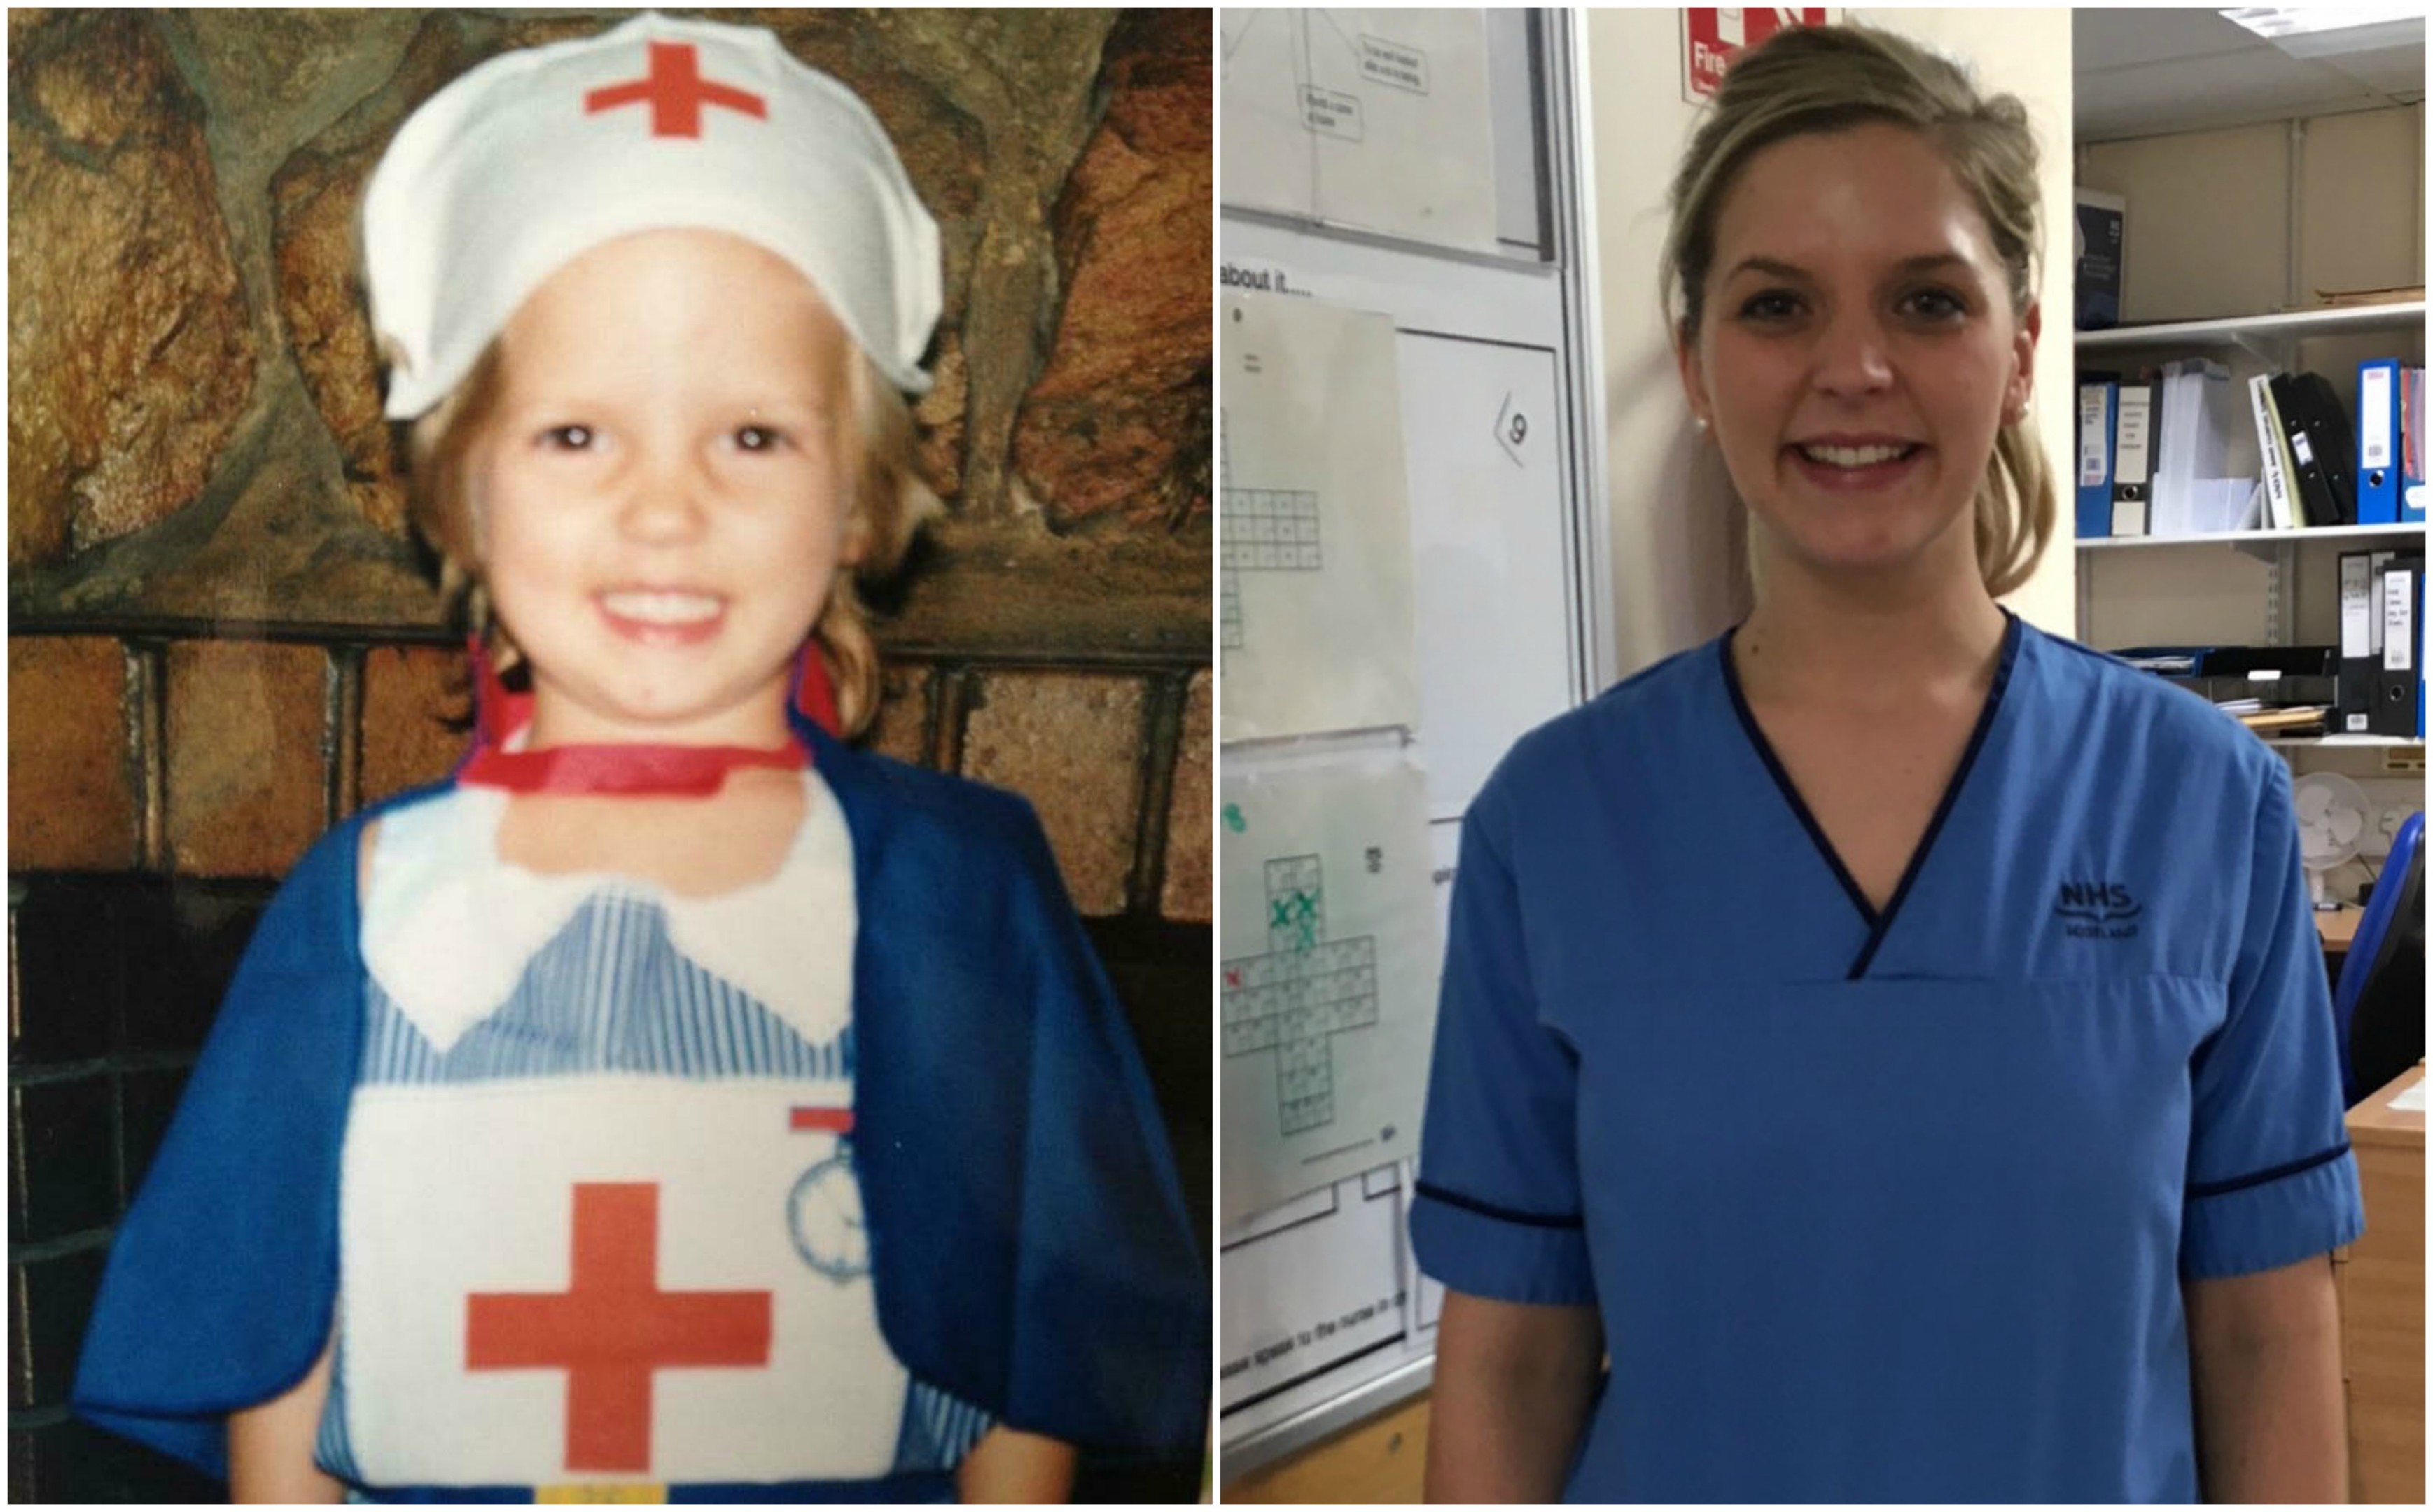 Michaela Olver had wanted to be a nurse for her whole life